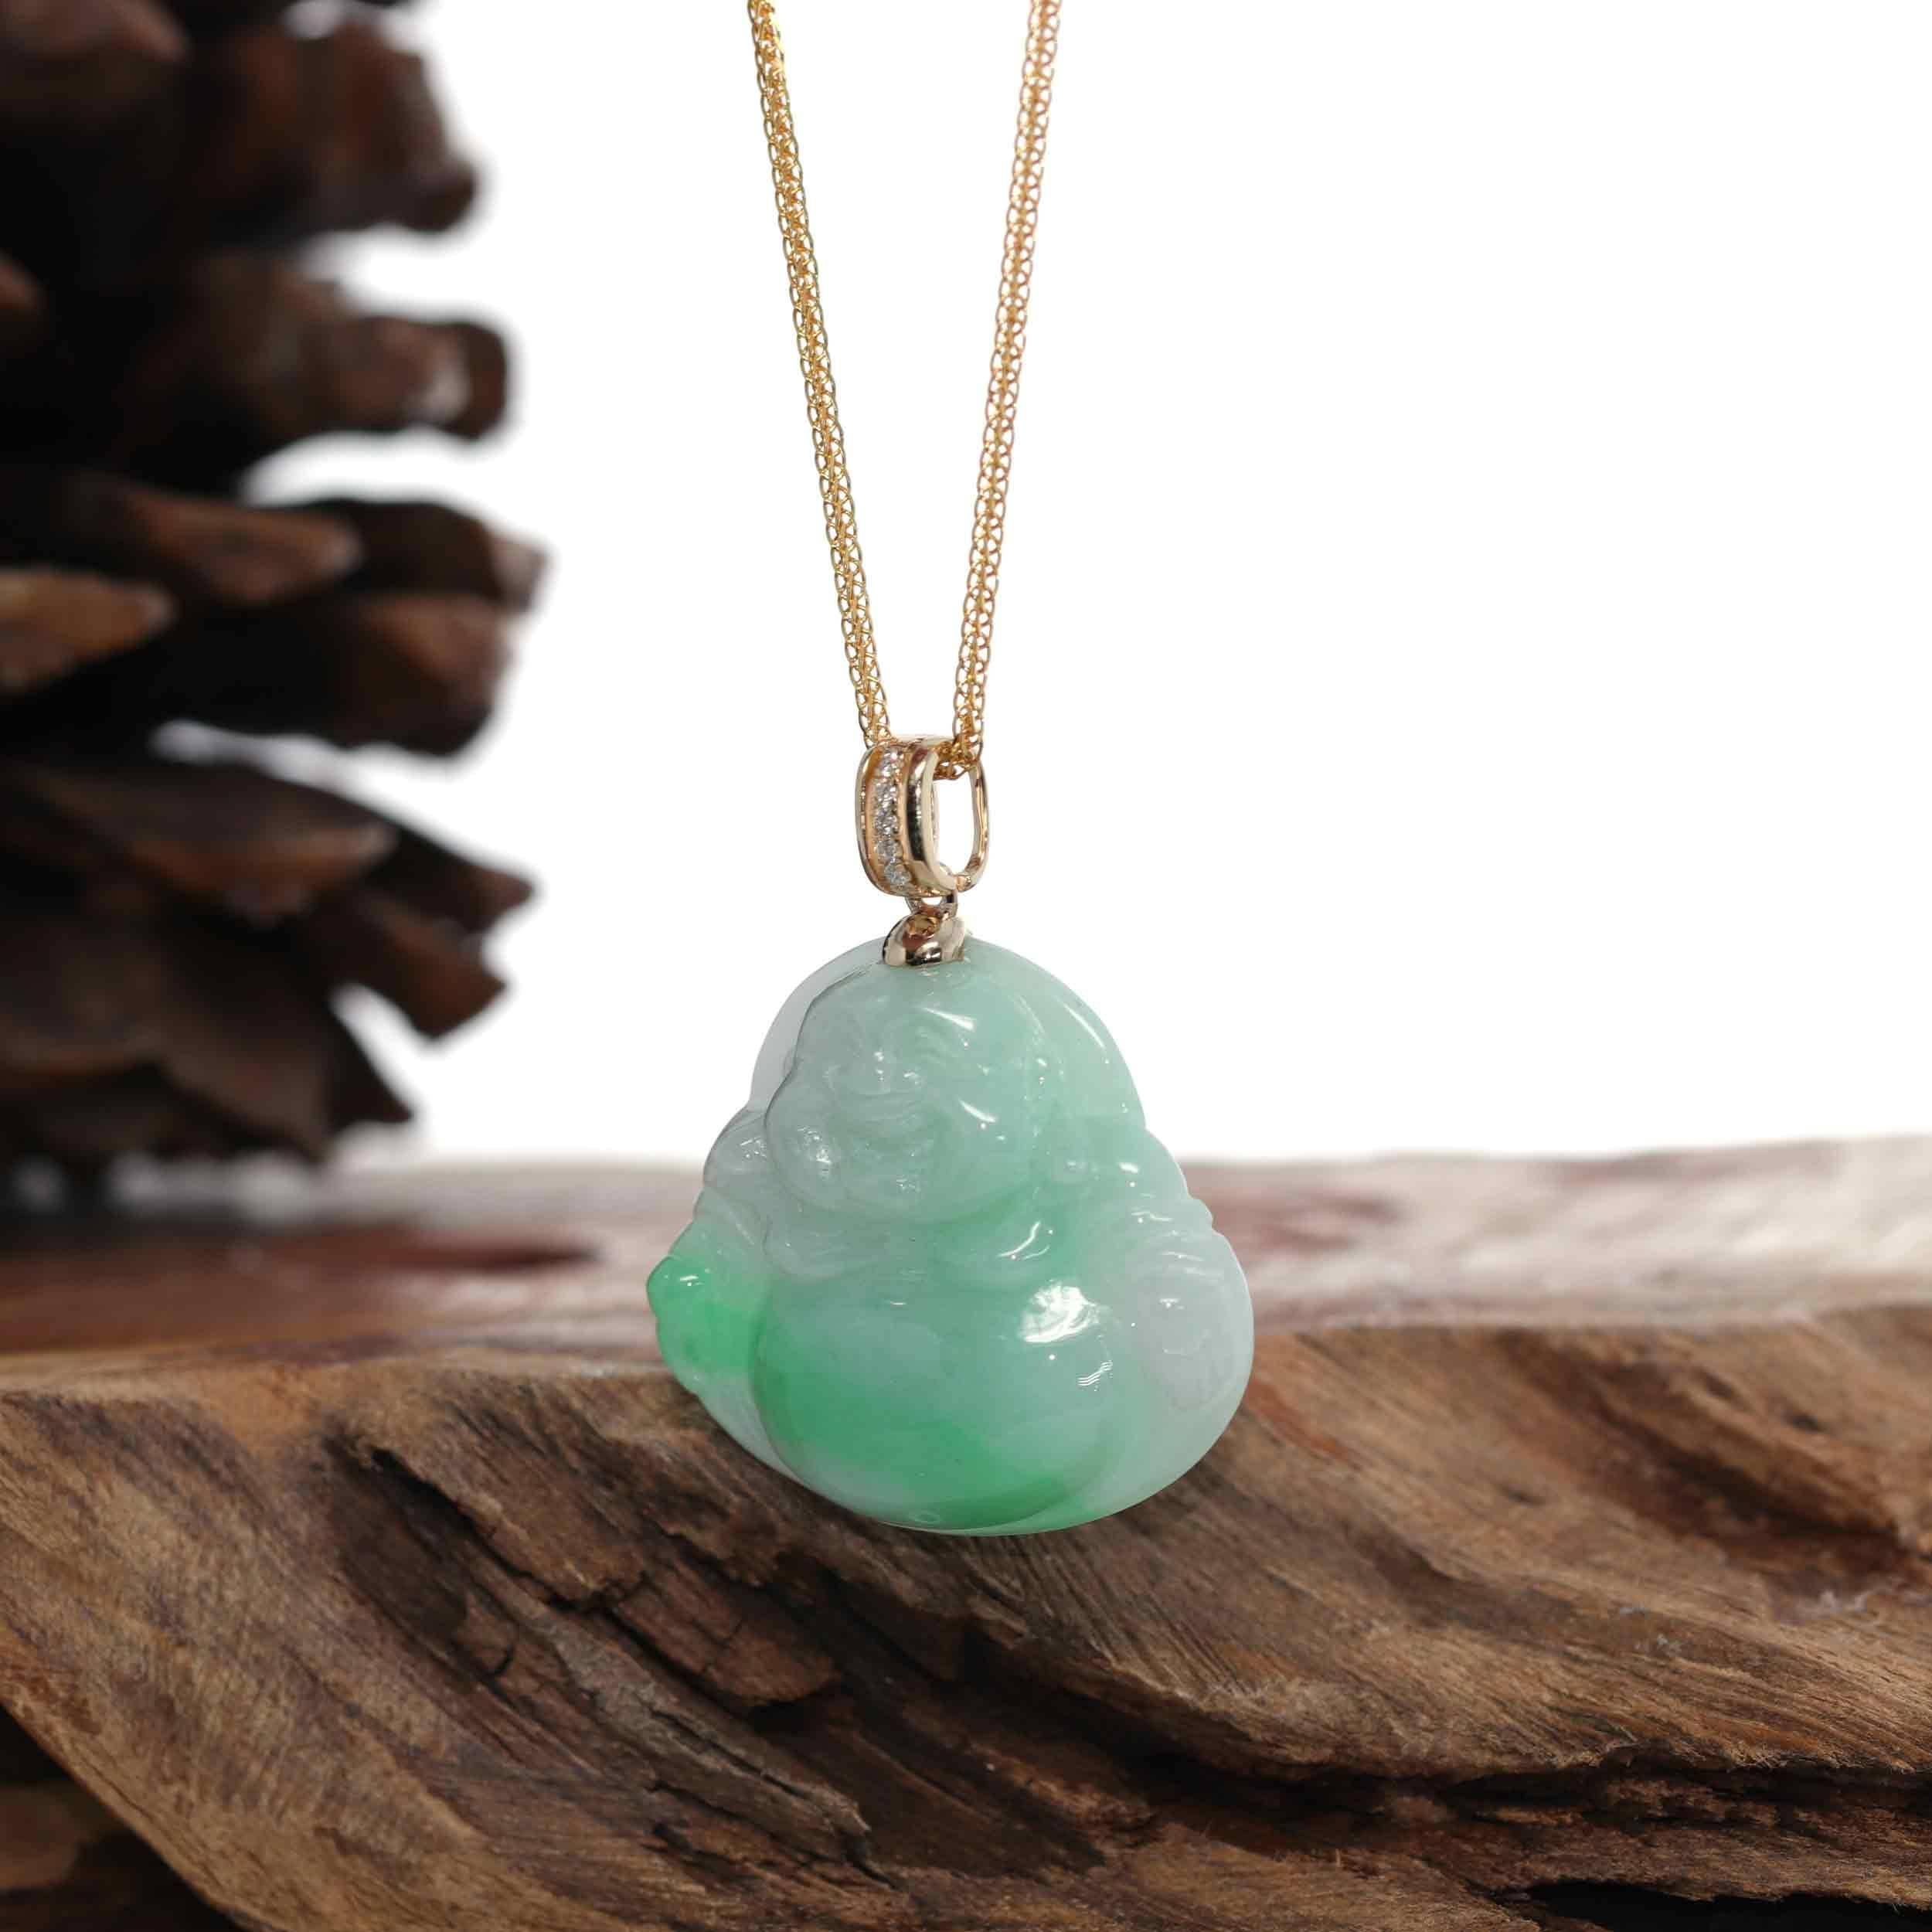 * Detail--- One-of-a-kind jadeite Buddha necklace, inspired by the figure of the traditional Buddha body. Combined with a modern diamond bail. The piece is more than perfect for daily wear. Wearing items bearing the image of Buddha can remind us to